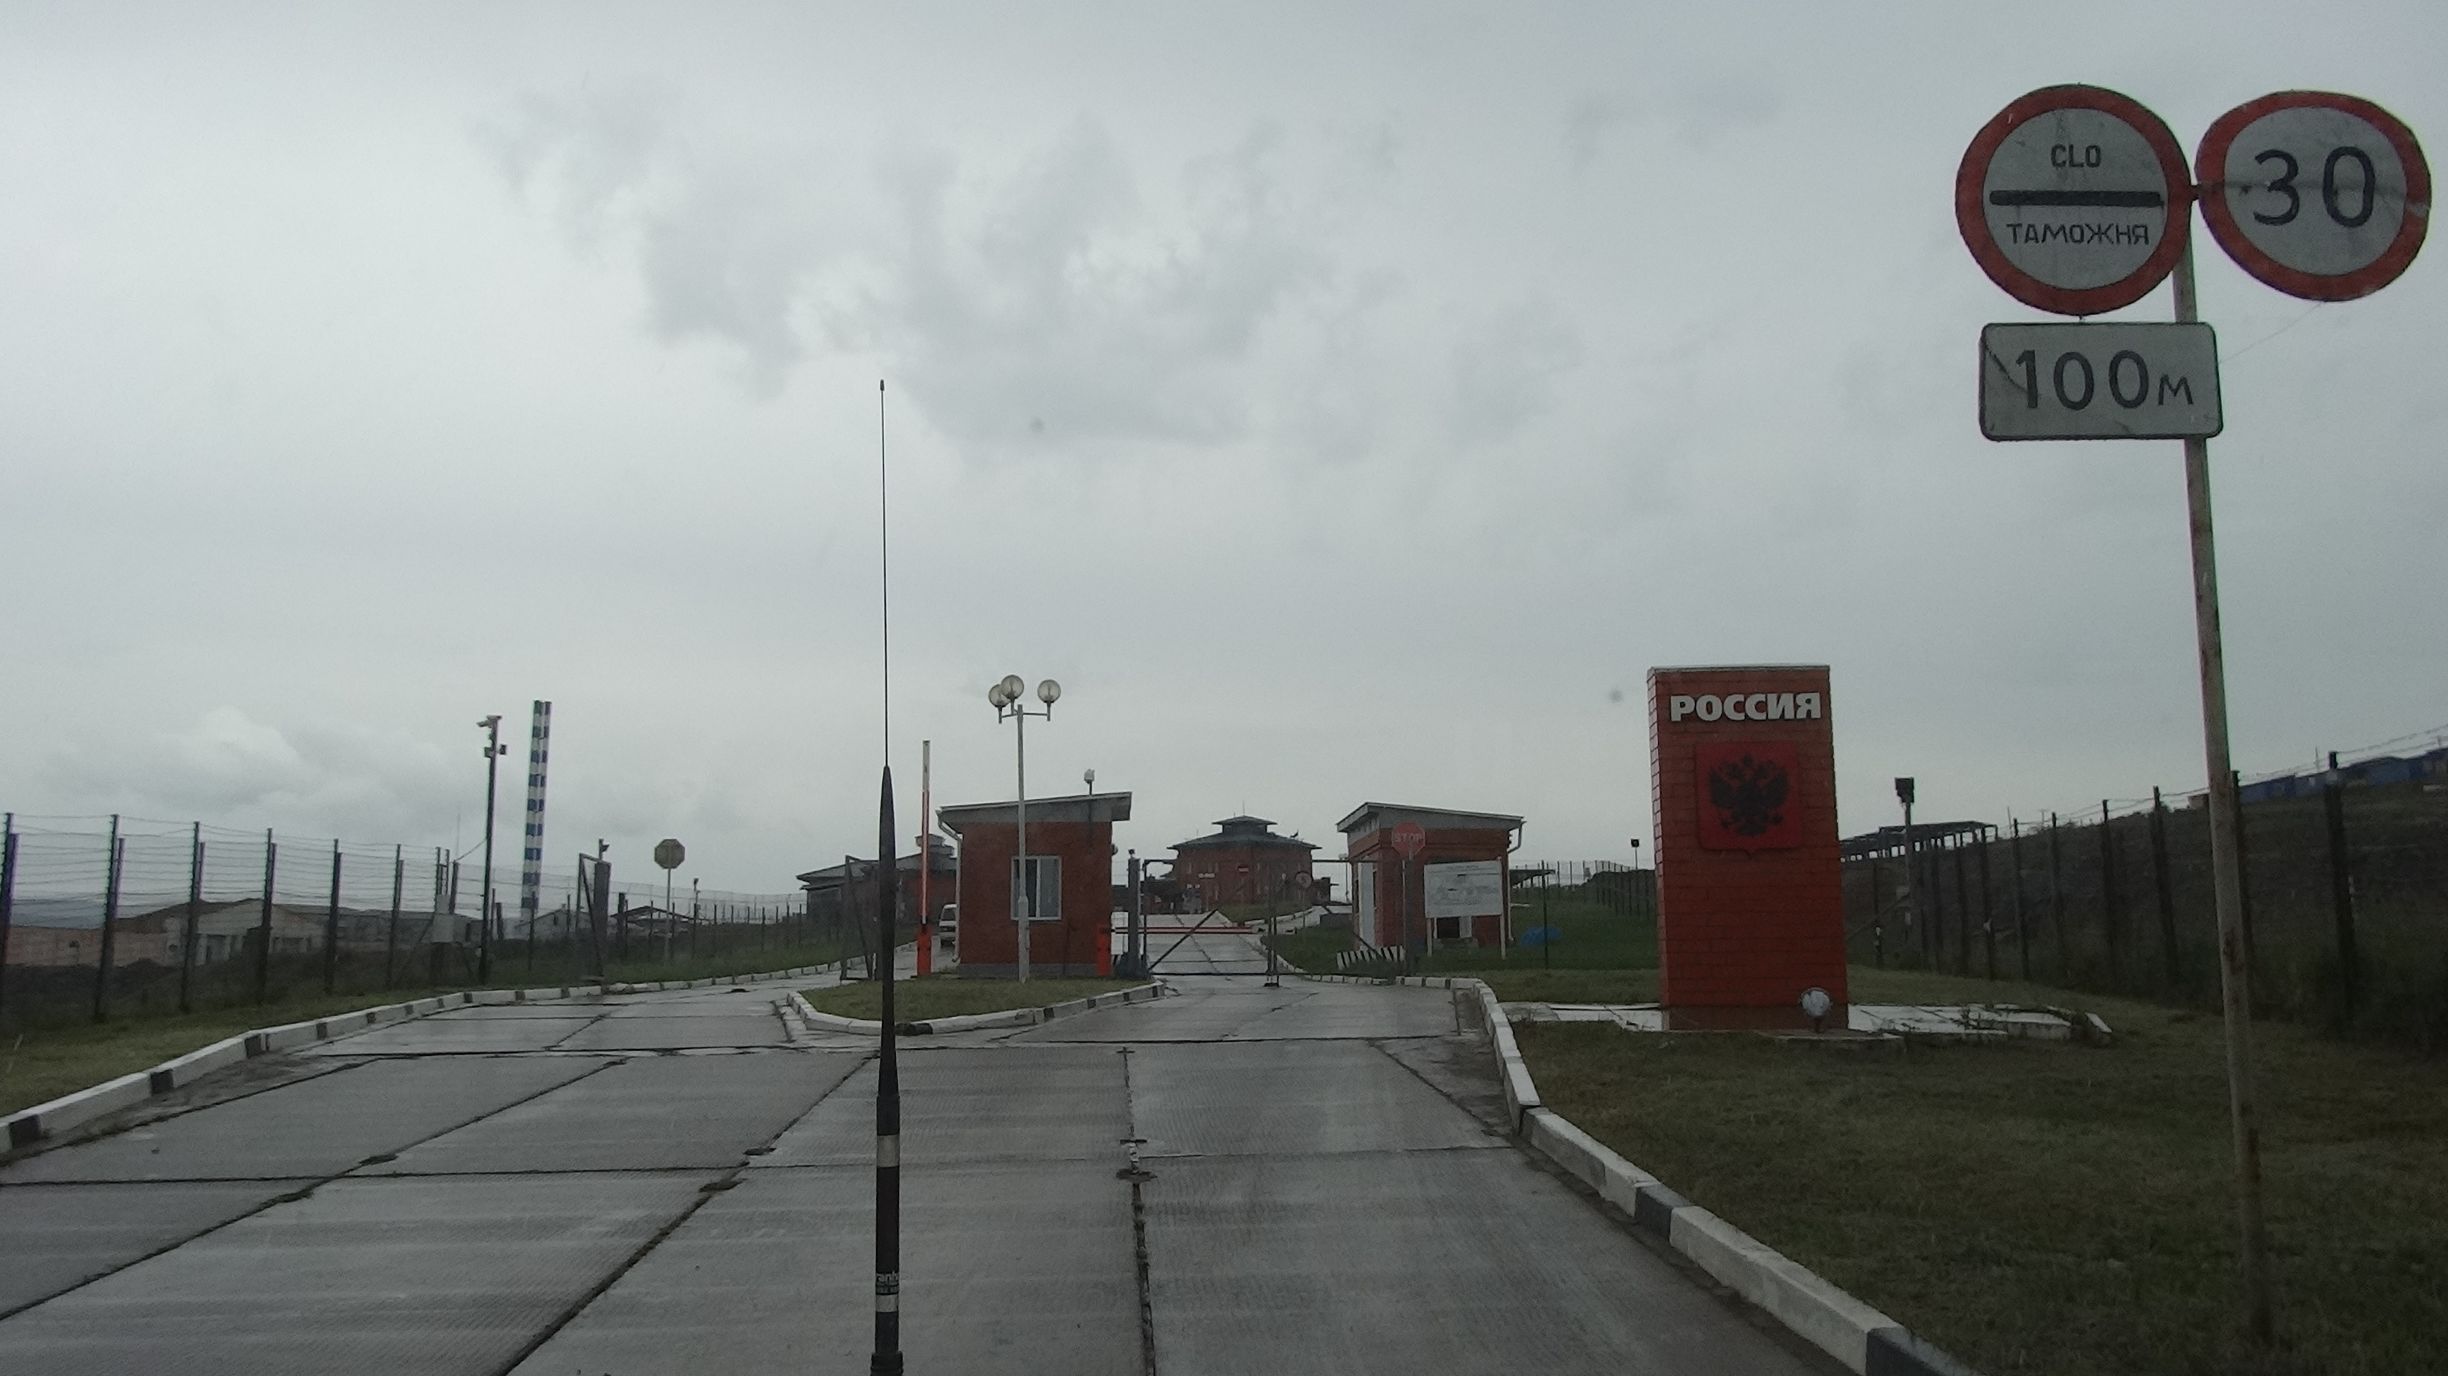 a short section of no-man's land, the view of the Russian border post